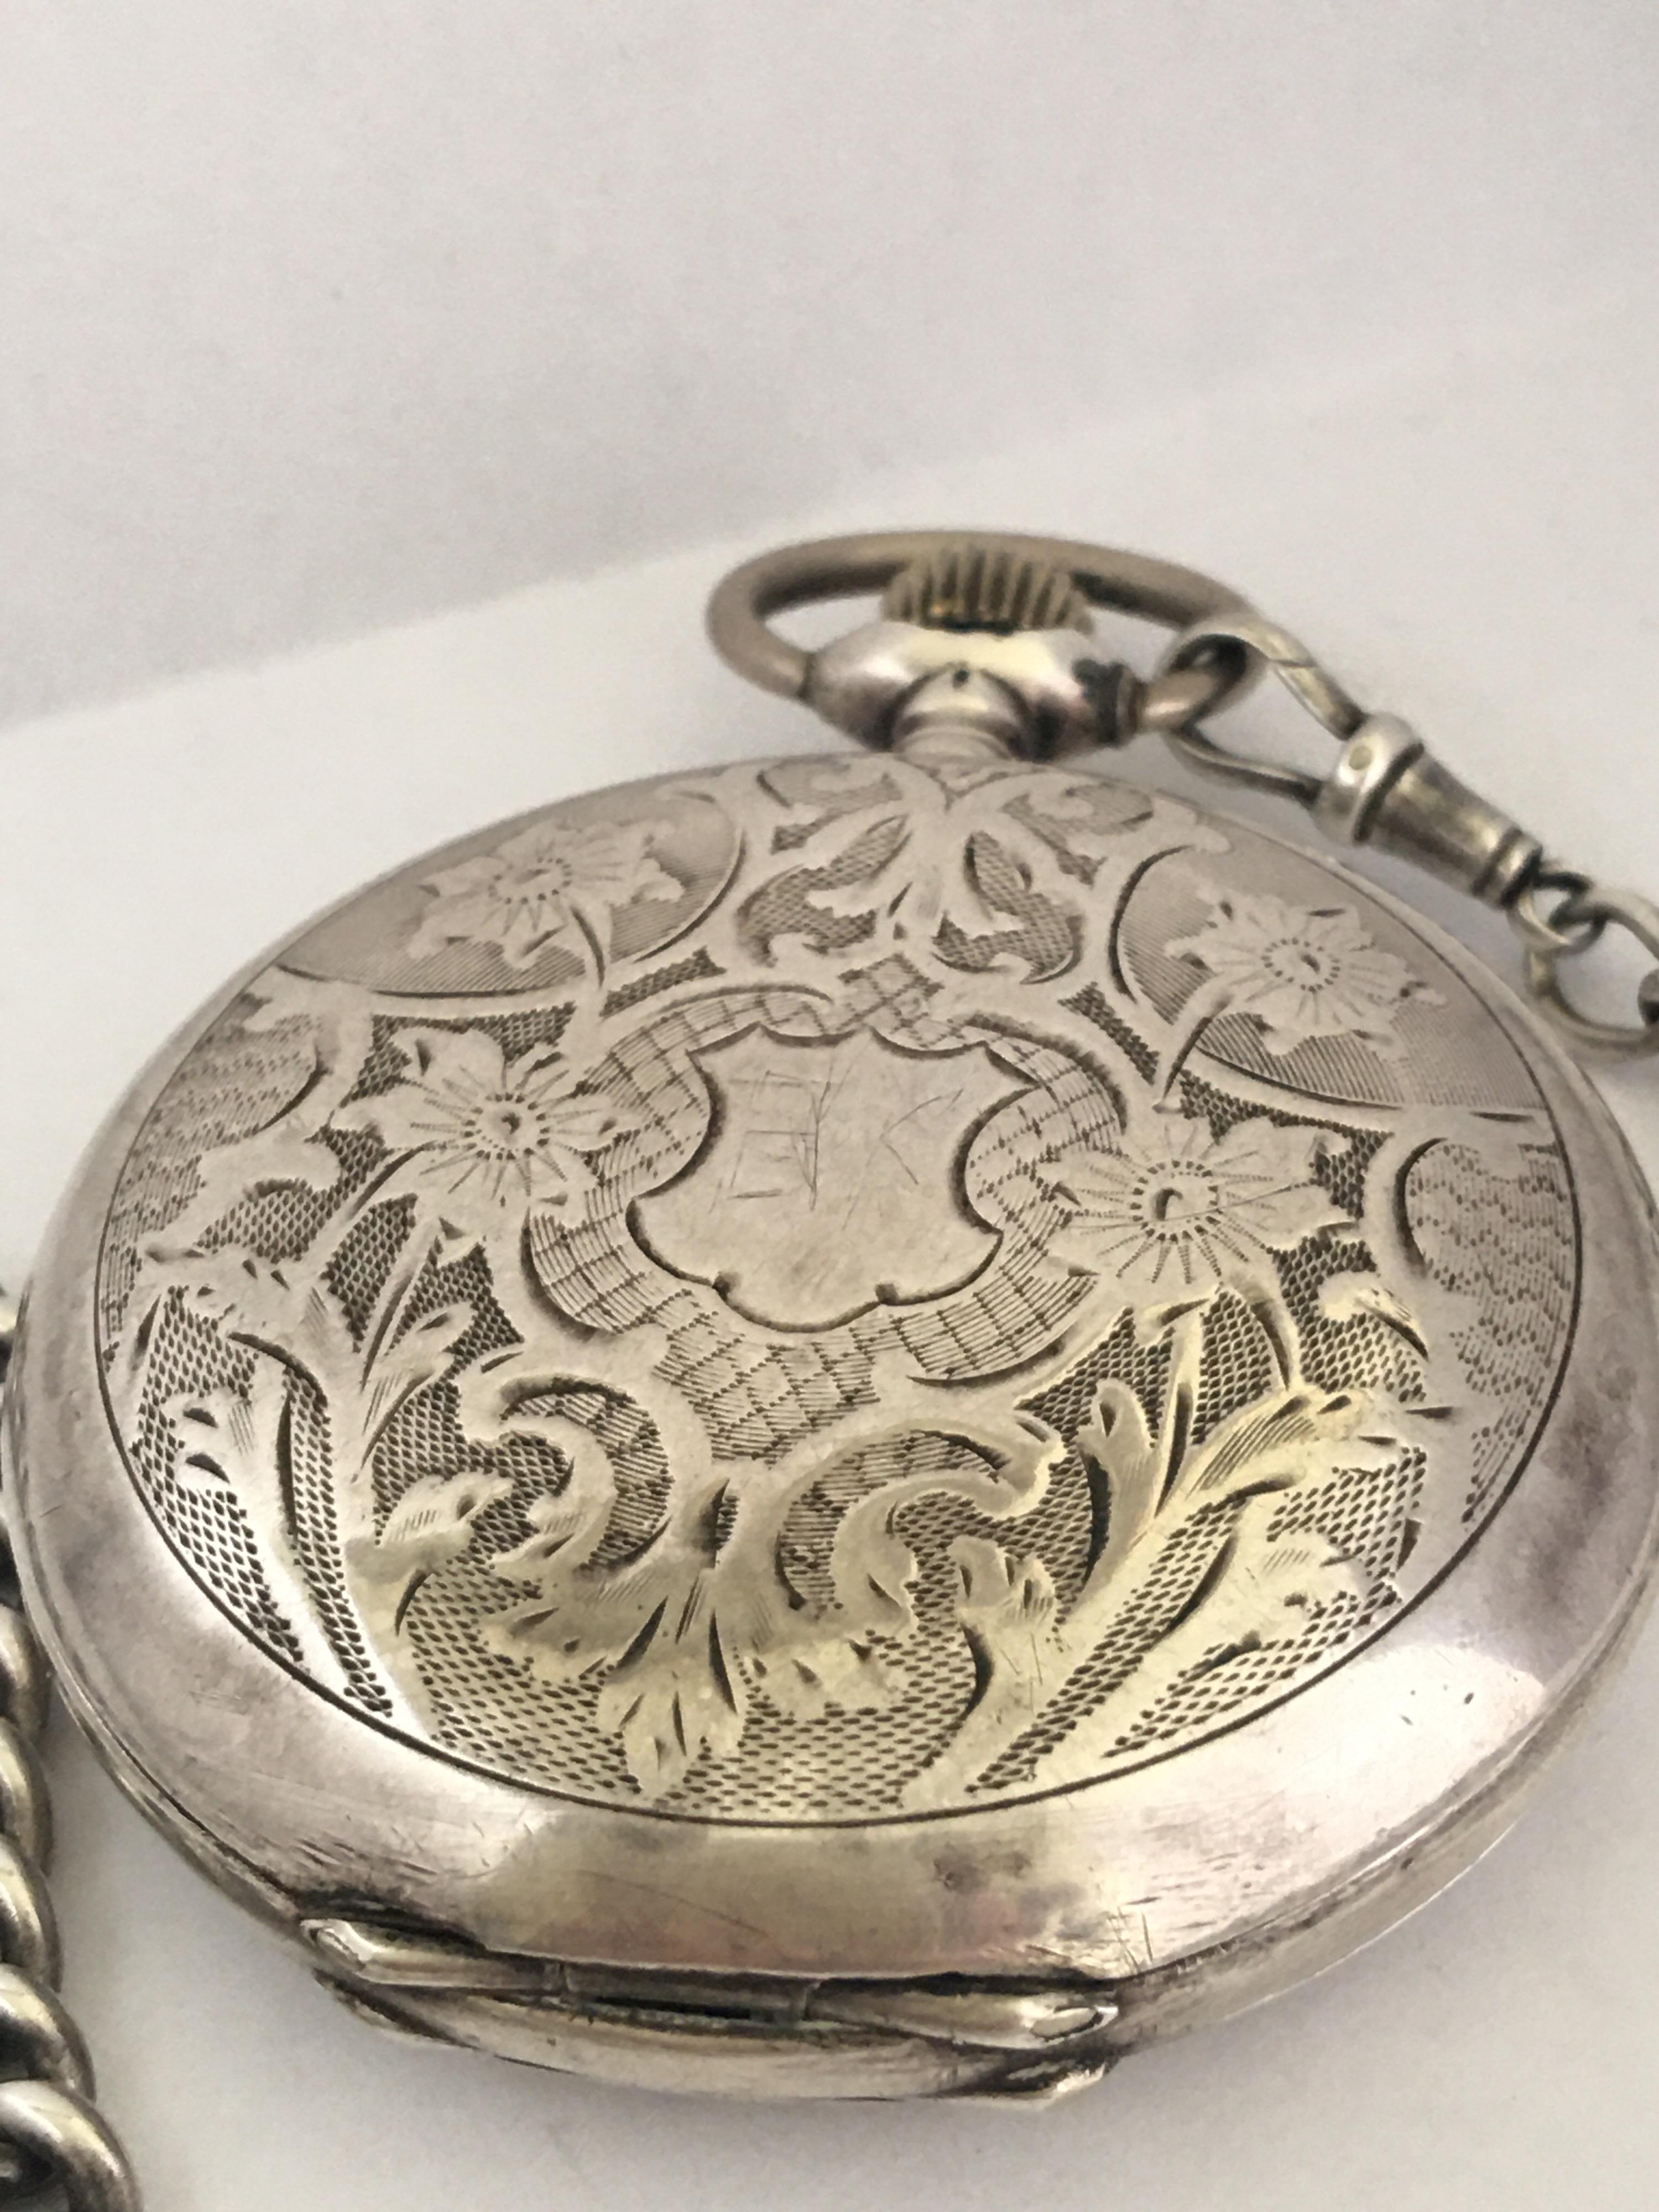 This beautiful stem winding antique silver pocket watch is in good working condition and it running accurately. Watch diameter is 58mm.

It comes with an Albert graduated Silver Pocket watch chain which each link has a silver hallmarks 12.5inches